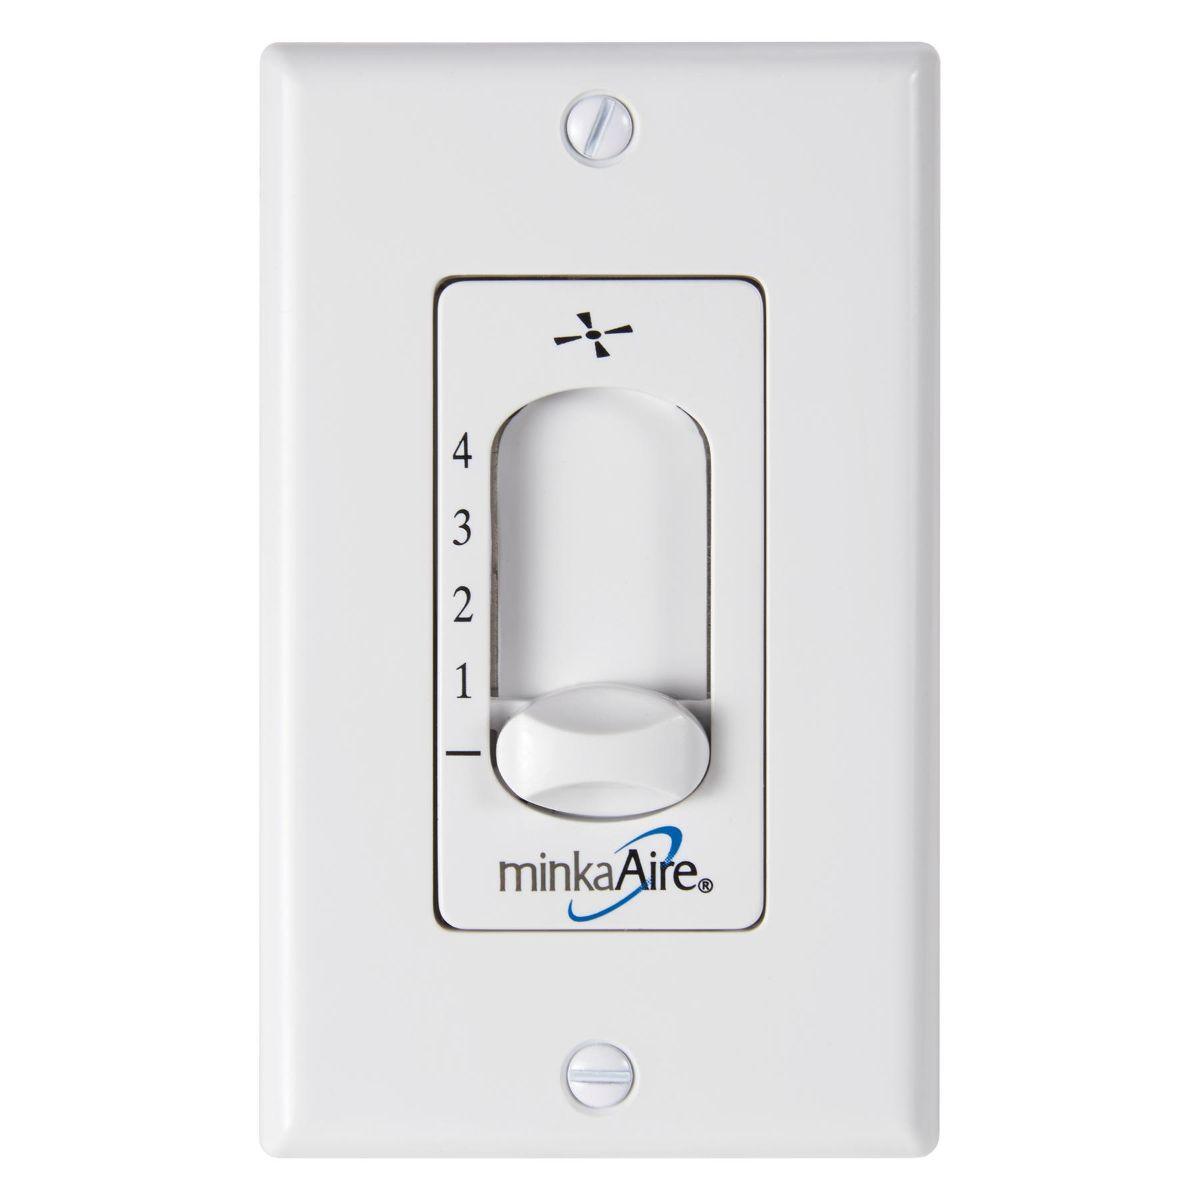 Roto 4-Speed Ceiling Fan Wall Control, White Finish